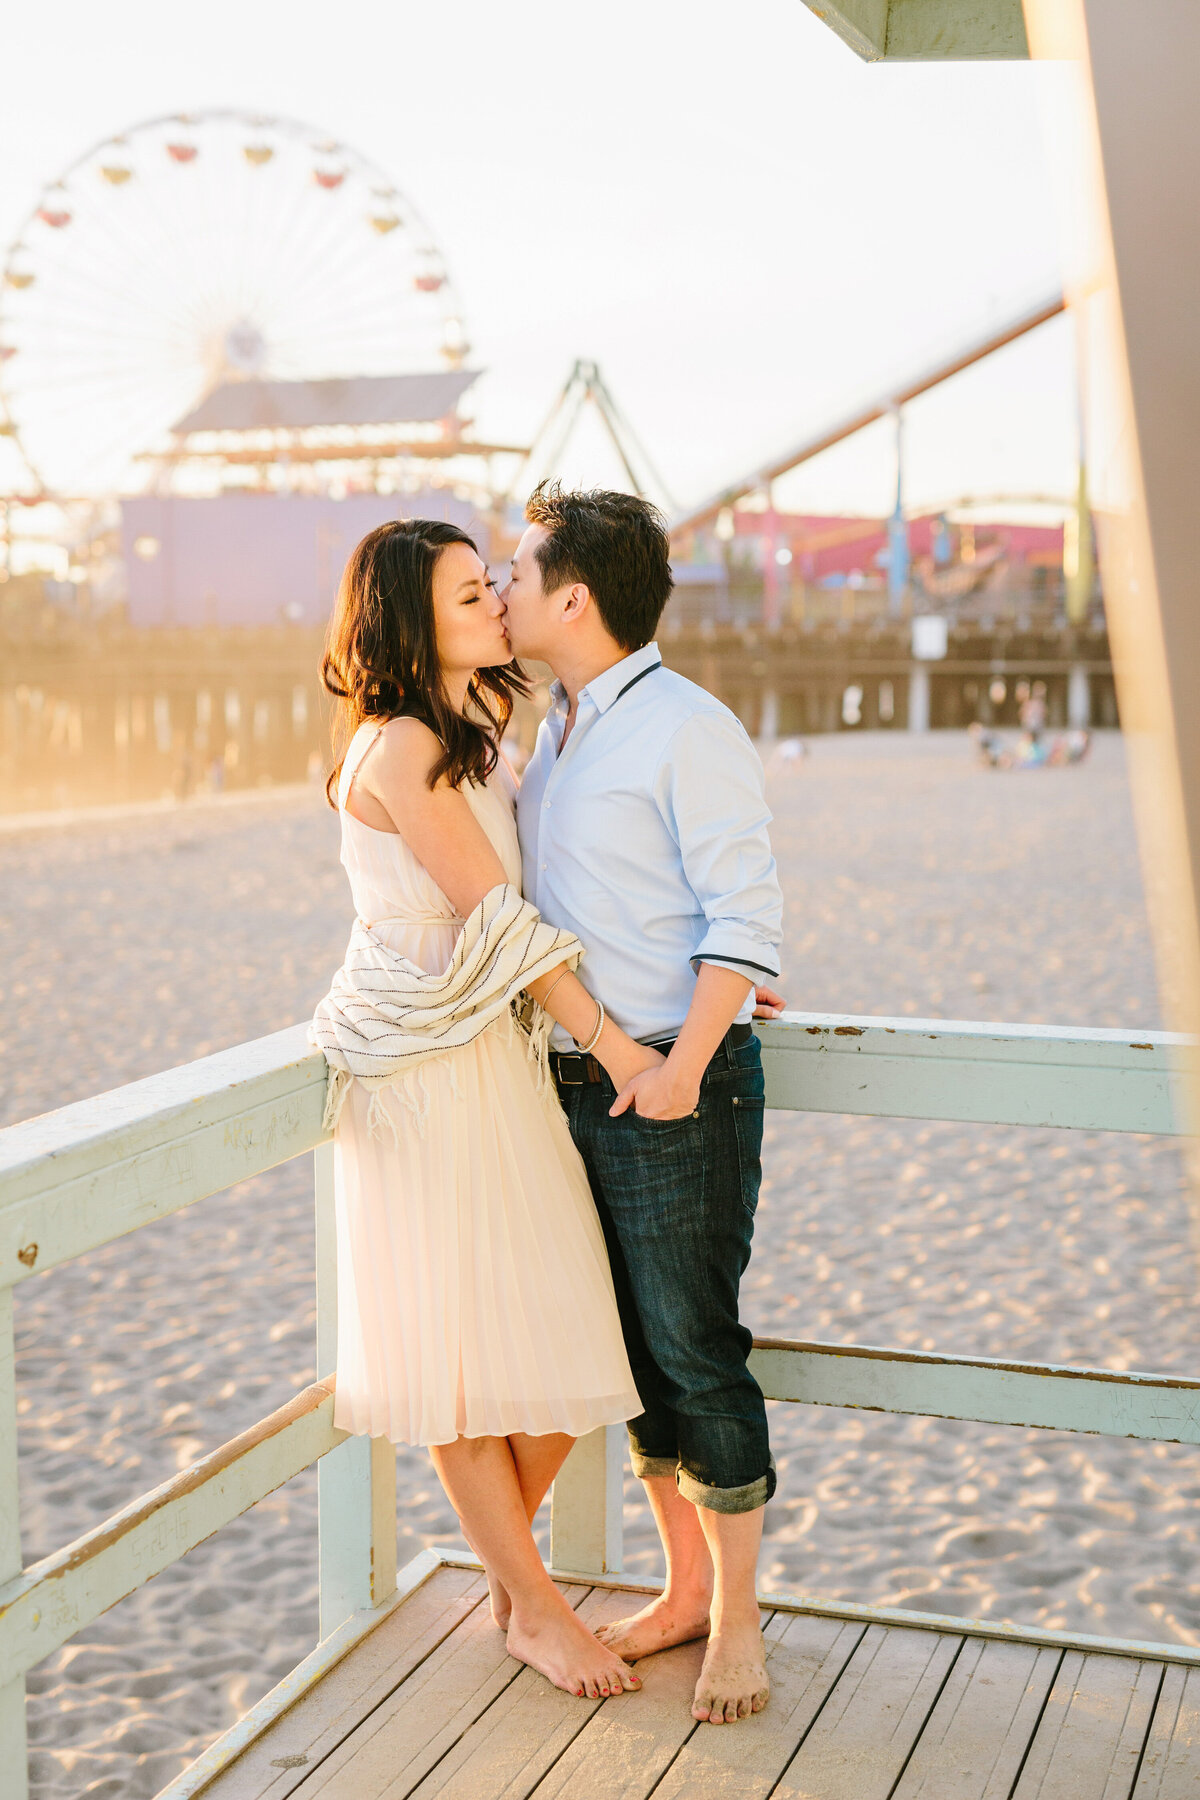 Best California and Texas Engagement Photographer-Jodee Debes Photography-257